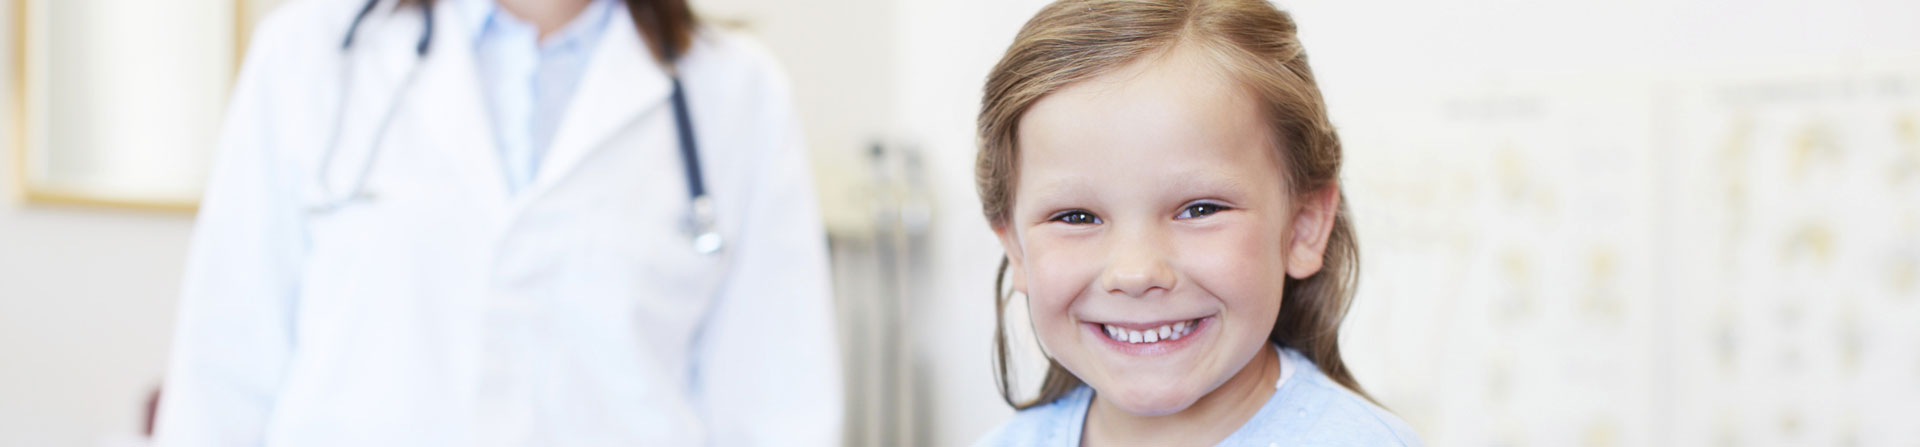 little girl smiling and her doctor